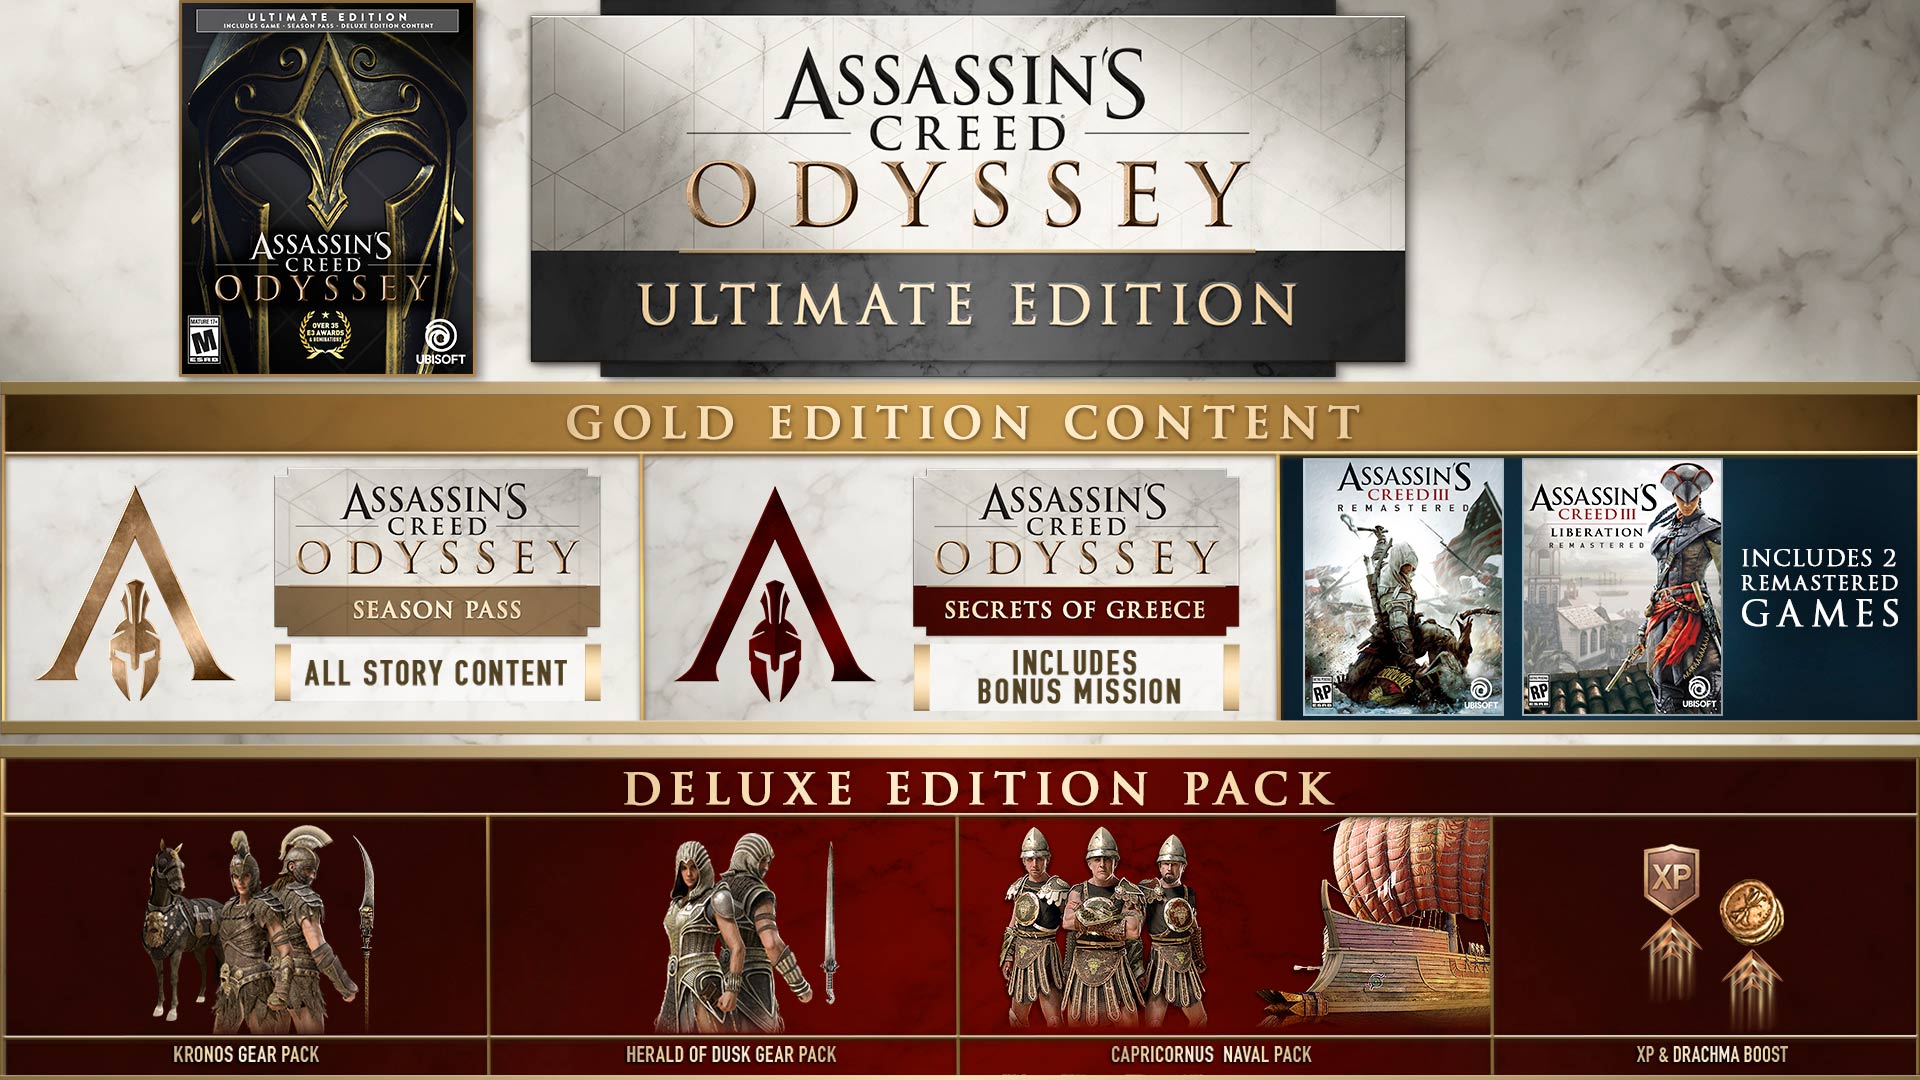 Assassin s creed odyssey editions. Assassin's Creed Odyssey Gold Edition ps4. Assassin's Creed Odyssey Ultimate Edition ps4. Assassins Creed Одиссея Deluxe. Assassin's Creed® Odyssey - Ultimate Edition 830₽.